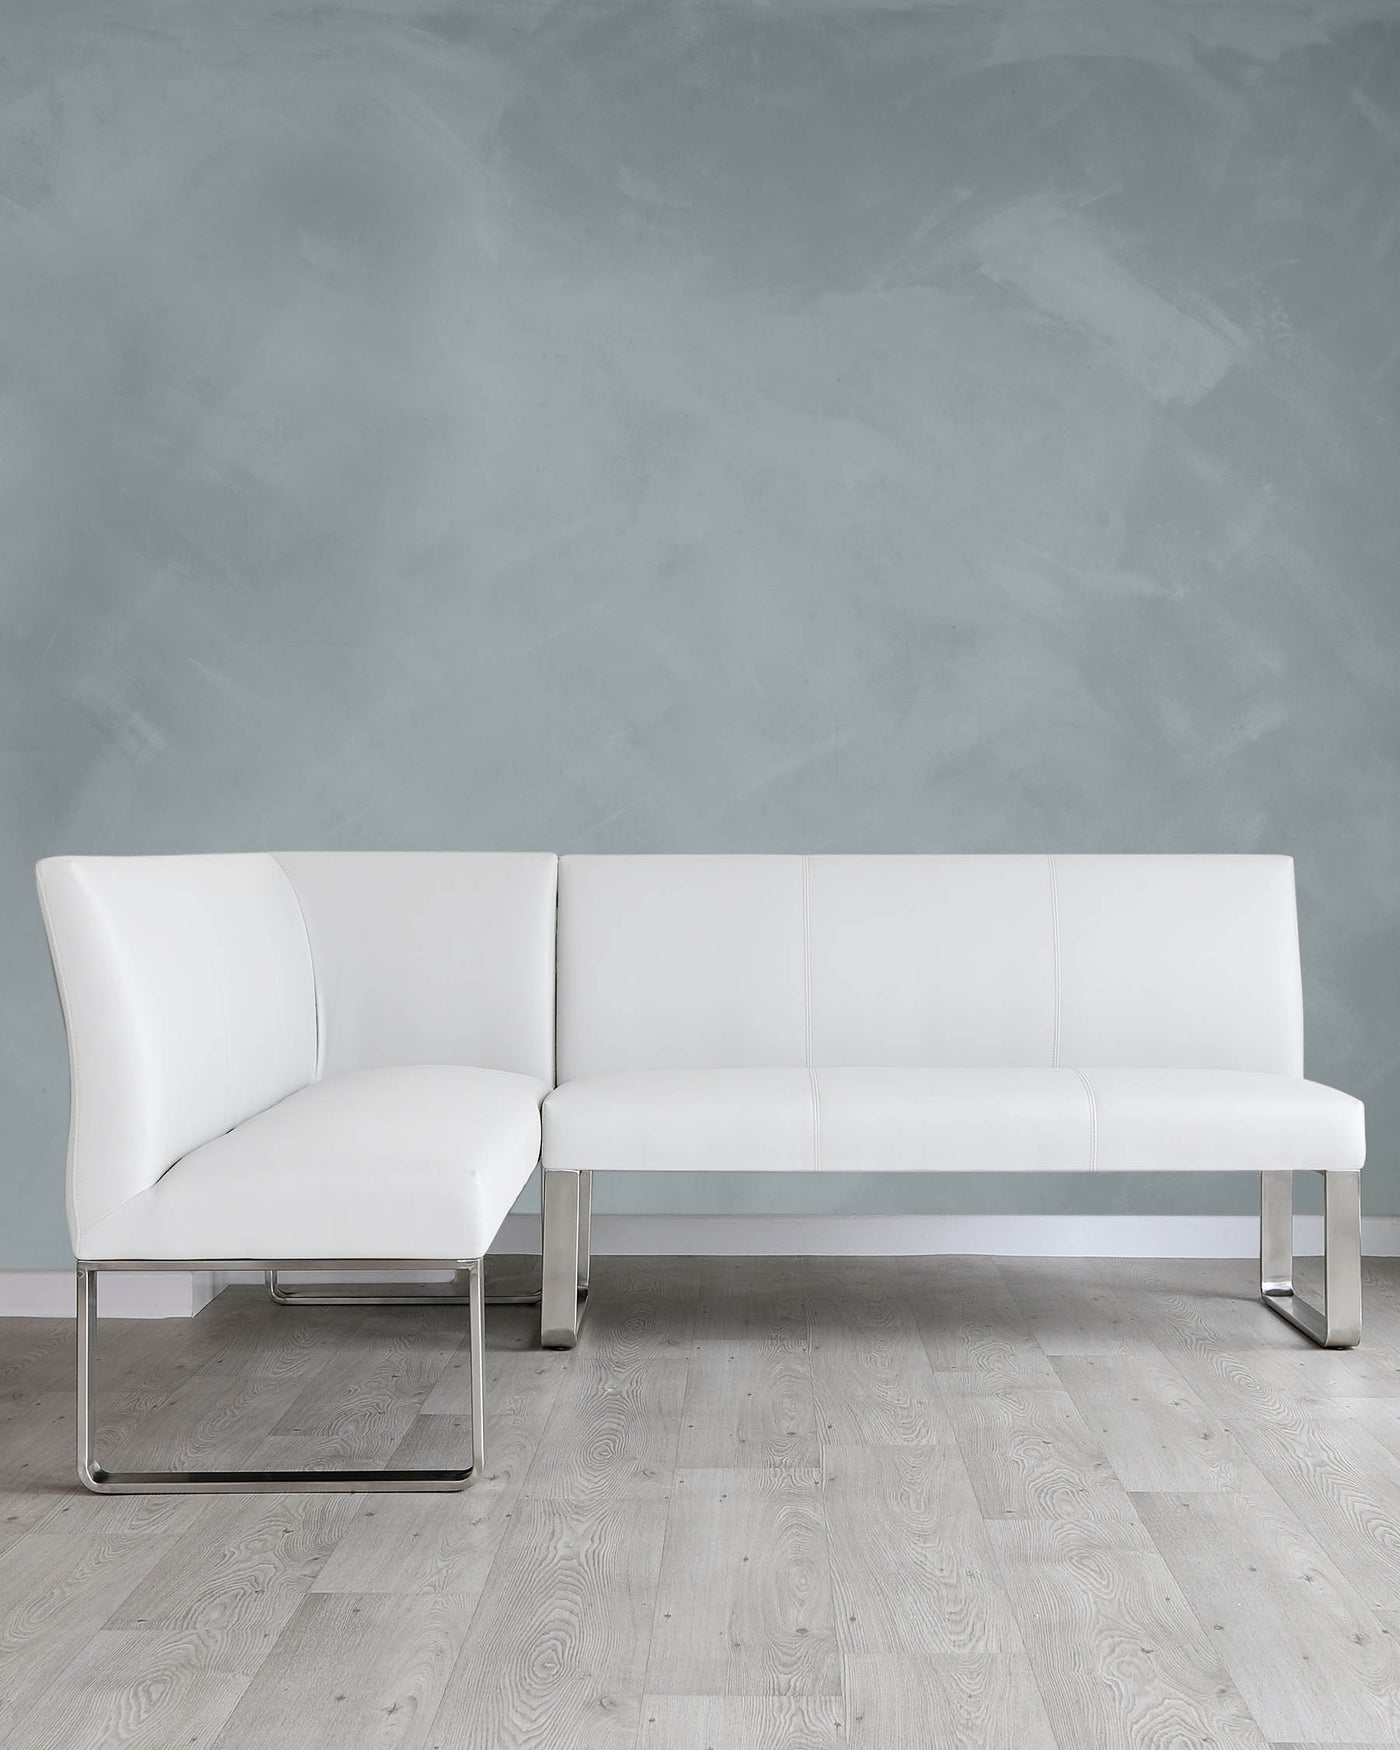 Modern white leather sectional sofa with chrome legs on a light wooden floor against a textured grey wall.